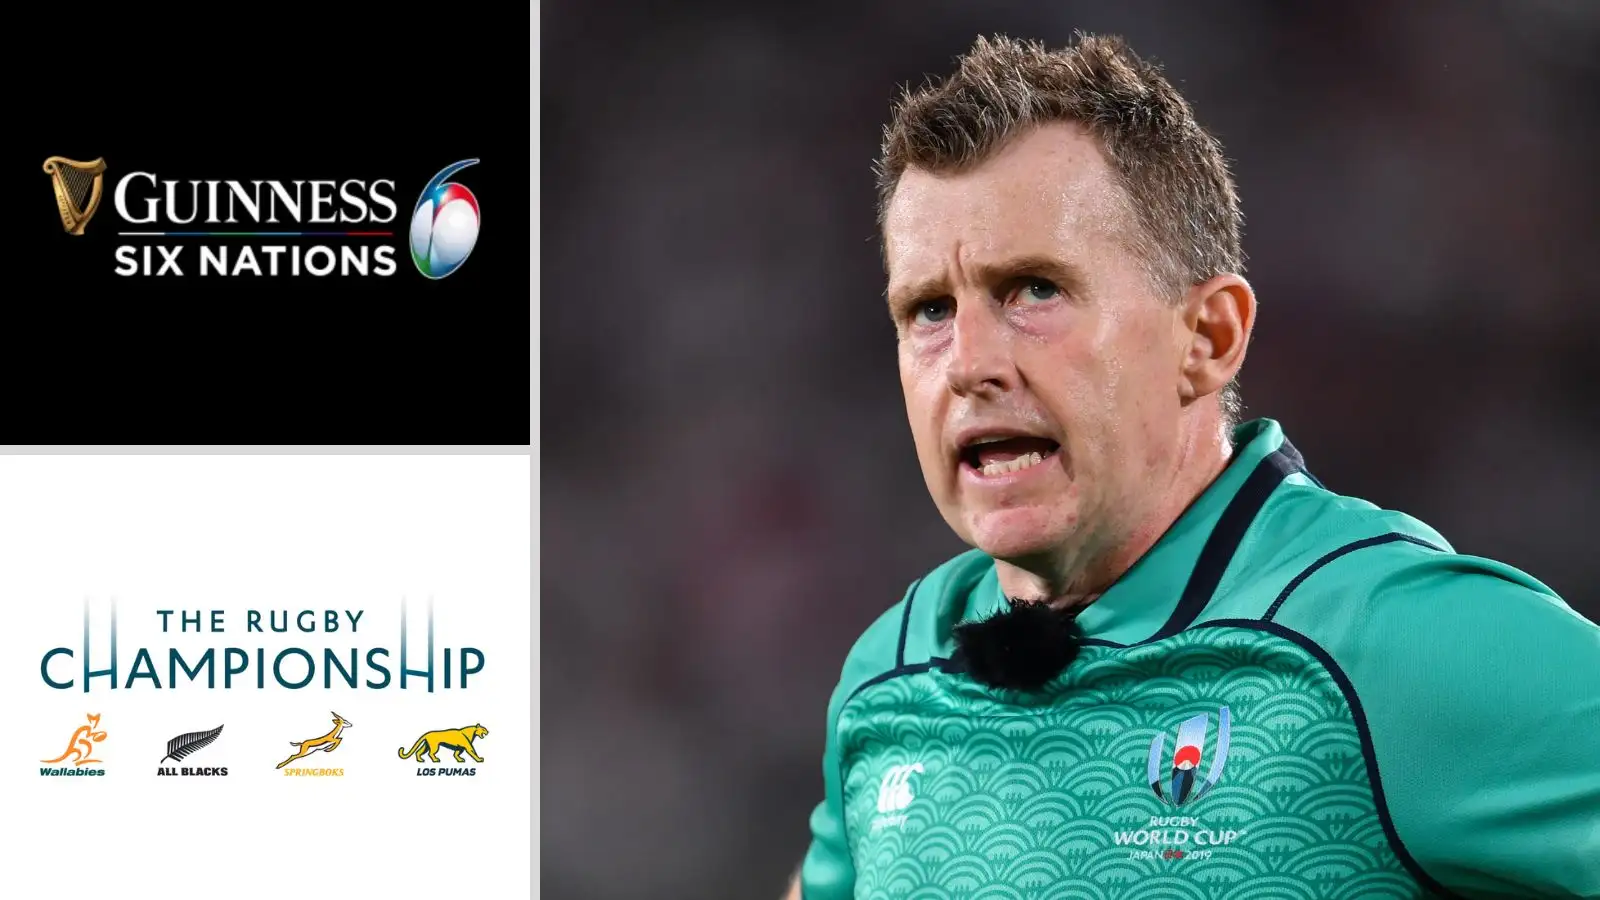 Nigel Owens classe mieux les Six Nations que le Rugby Championship : PlanetRugby